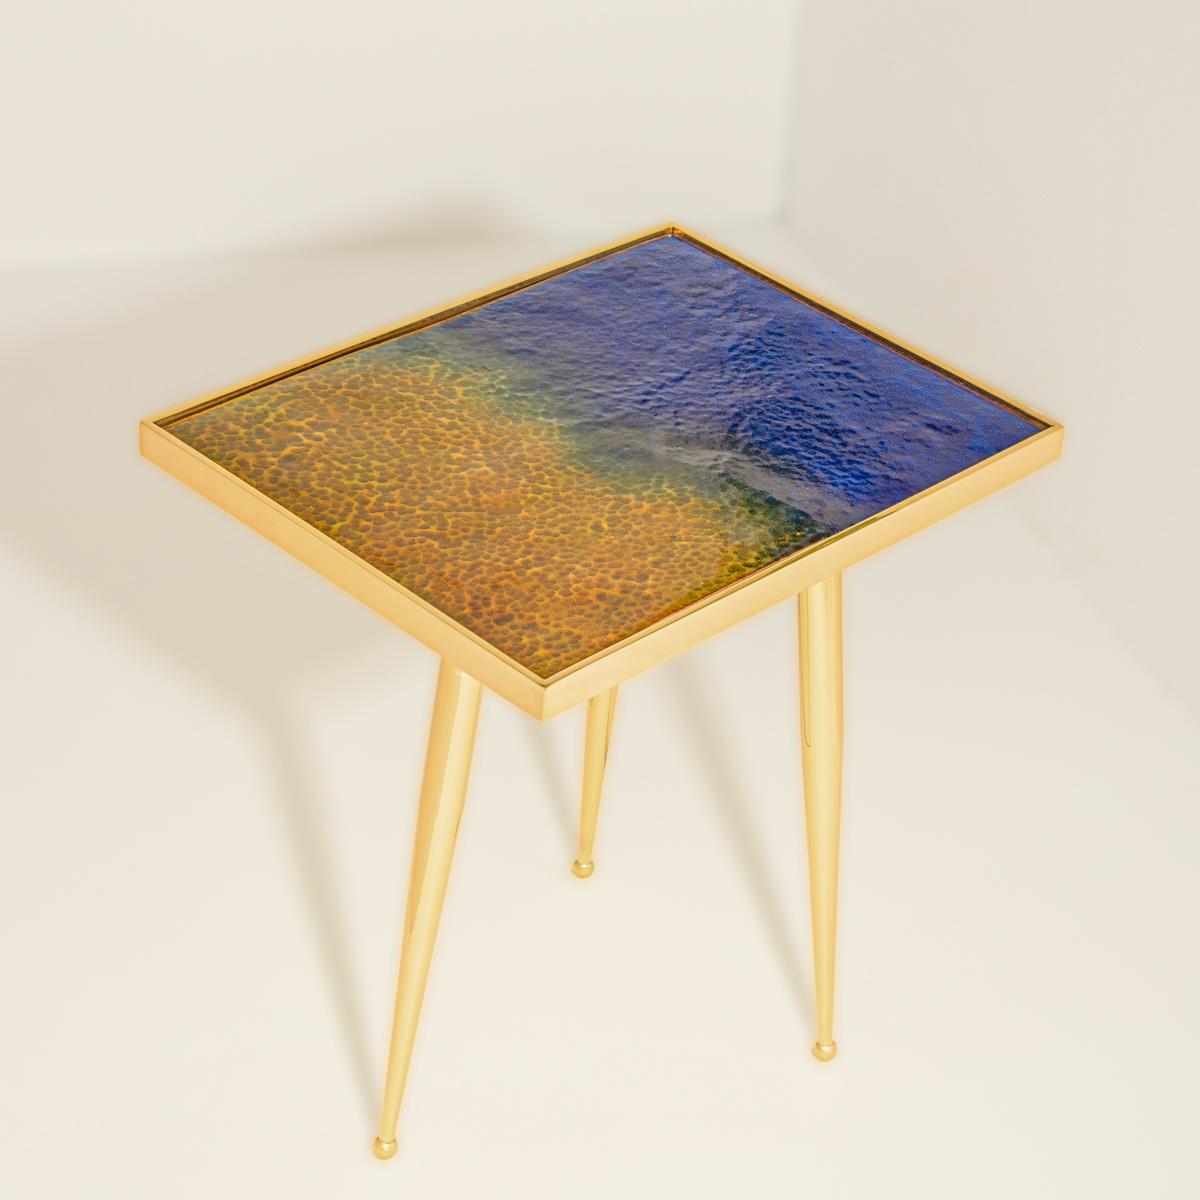 The Marea Estate side table is the first installment of the Marea series depicting the four seasons via enameled tops handmade in Puglia. This iteration represents a Mediterranean summer with its dark blue waters and golden sand